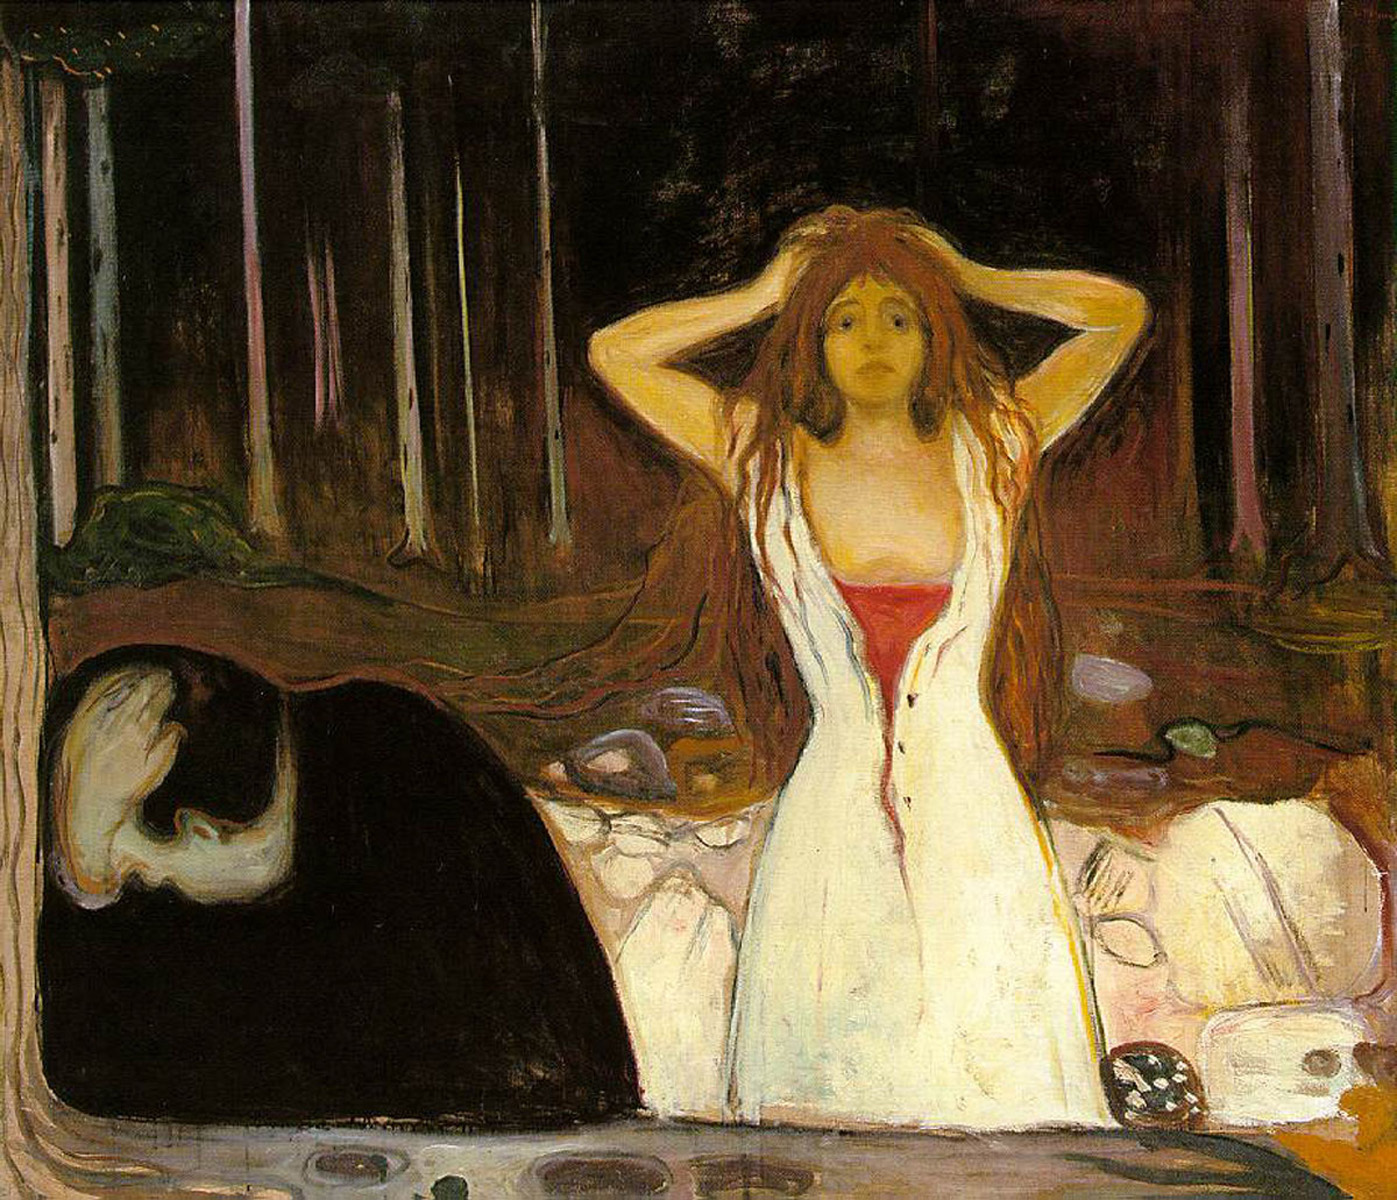 munch-ashes-1894